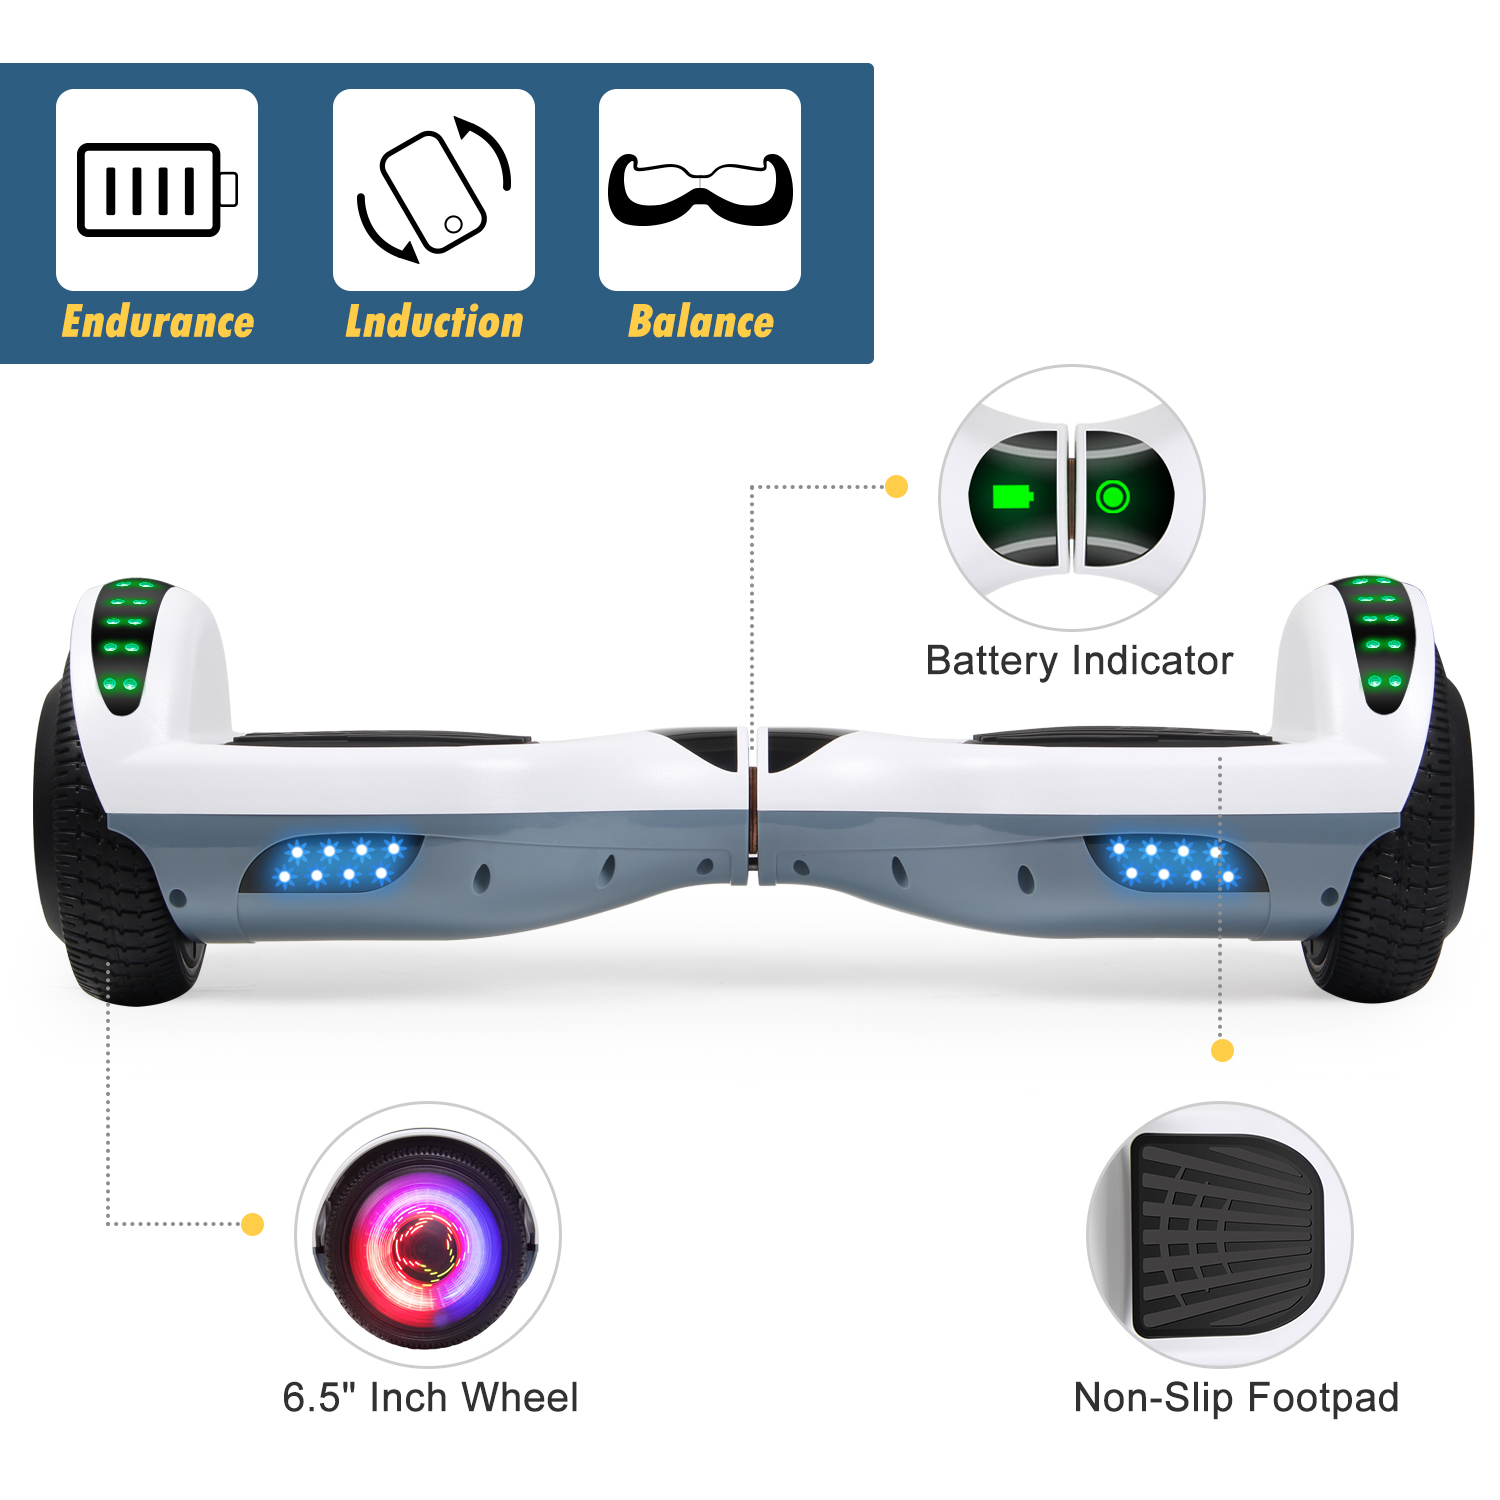 CBD Hoverboard 6.5 inch Self Balancing Hoverboard with LED Lights and Bluetooth Hoverboard for Adults and Kids Gift White - image 3 of 7